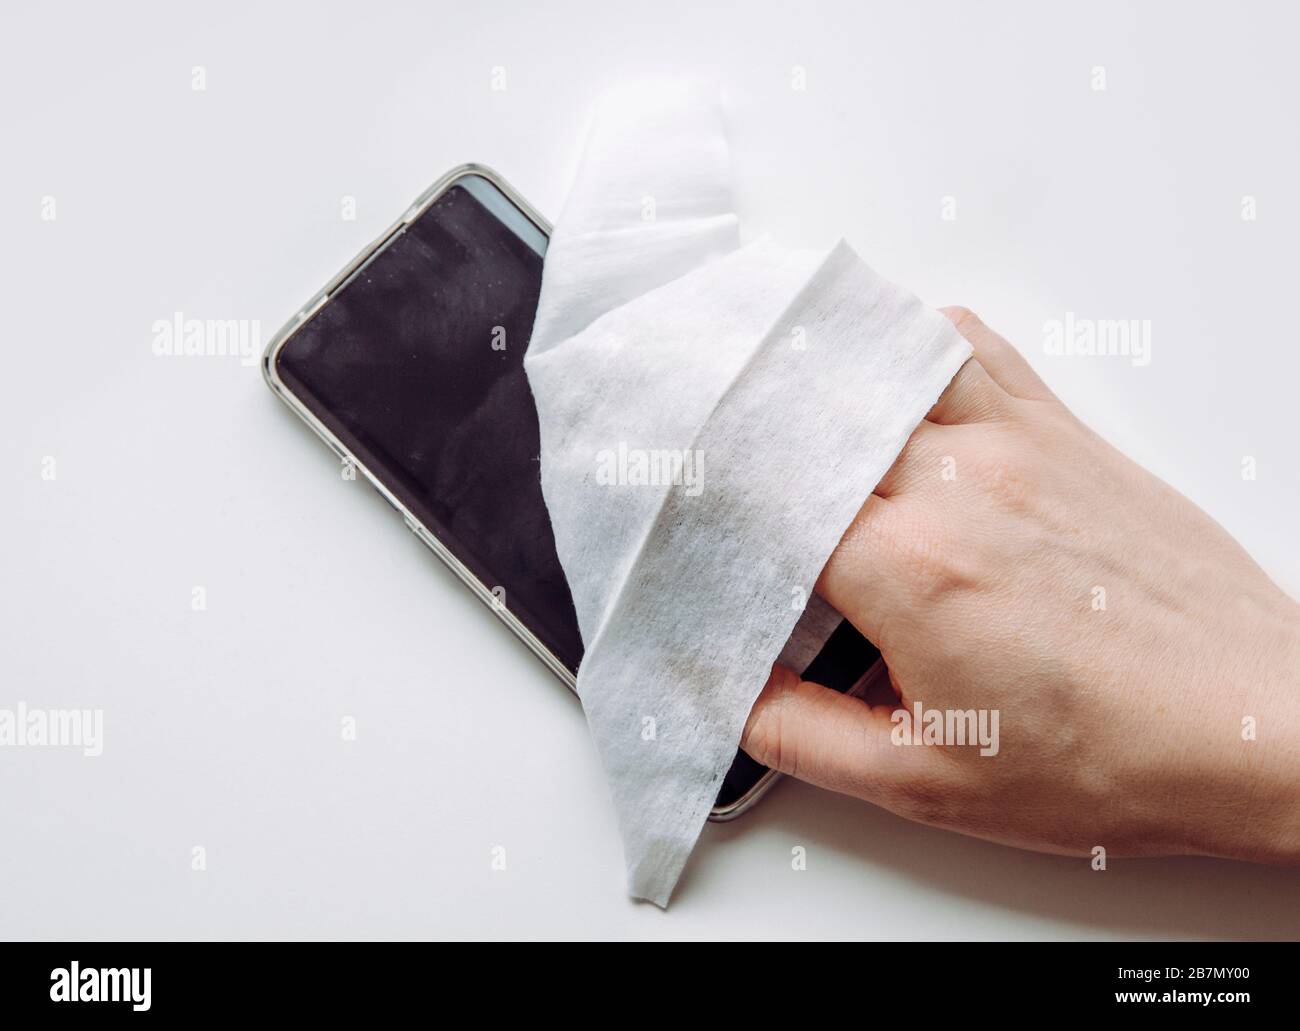 Close up view of man hand using antibacterial wet wipe for disinfecting smartphone touch screen. Stock Photo